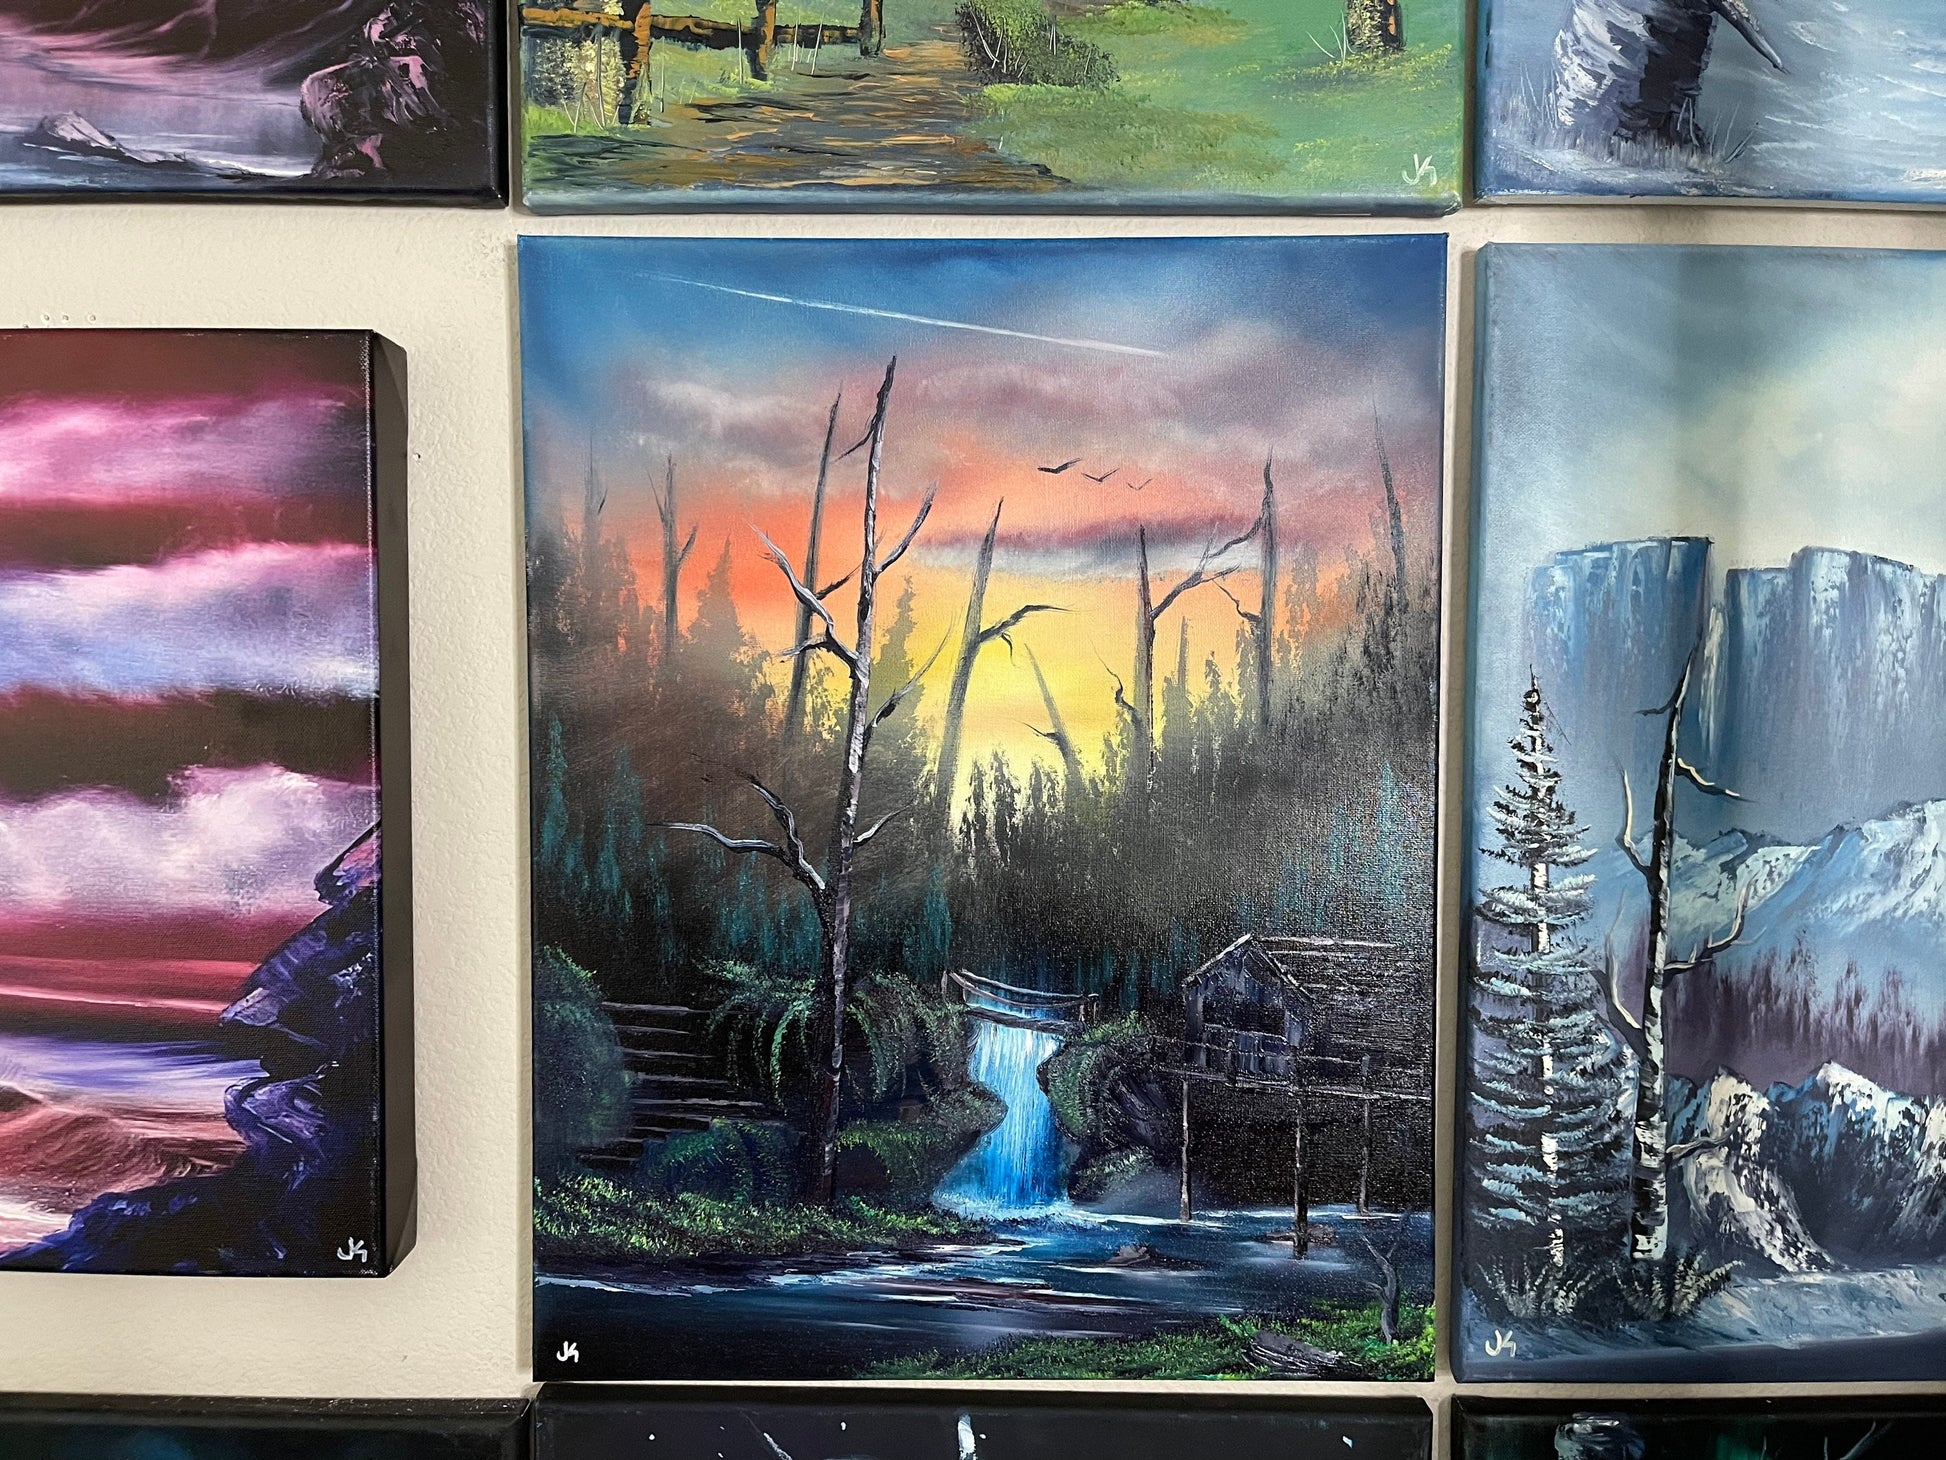 2 Custom Landscape Oil Paintings Painted Live on Tiktok and YouTube - date To Be Determined